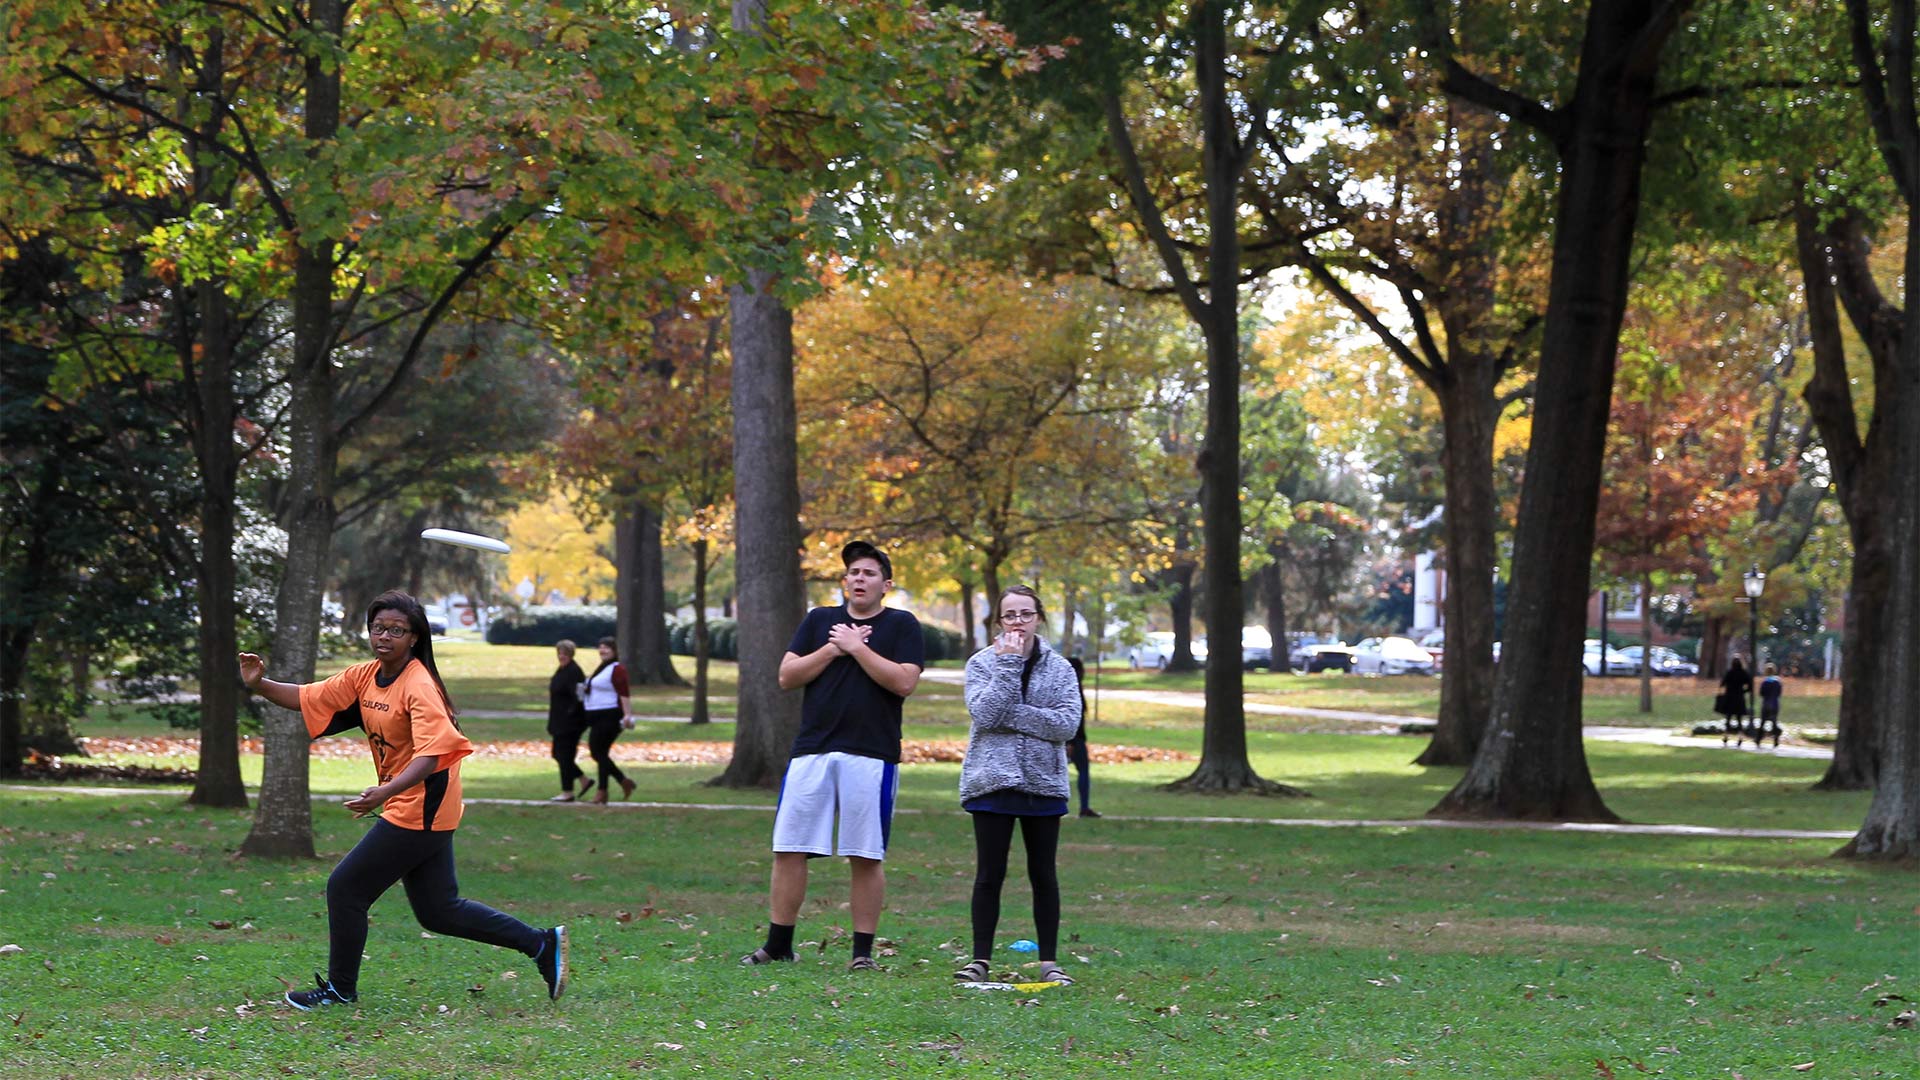 Ultimate Frisbee was popular with students at the Sport Spectacular.